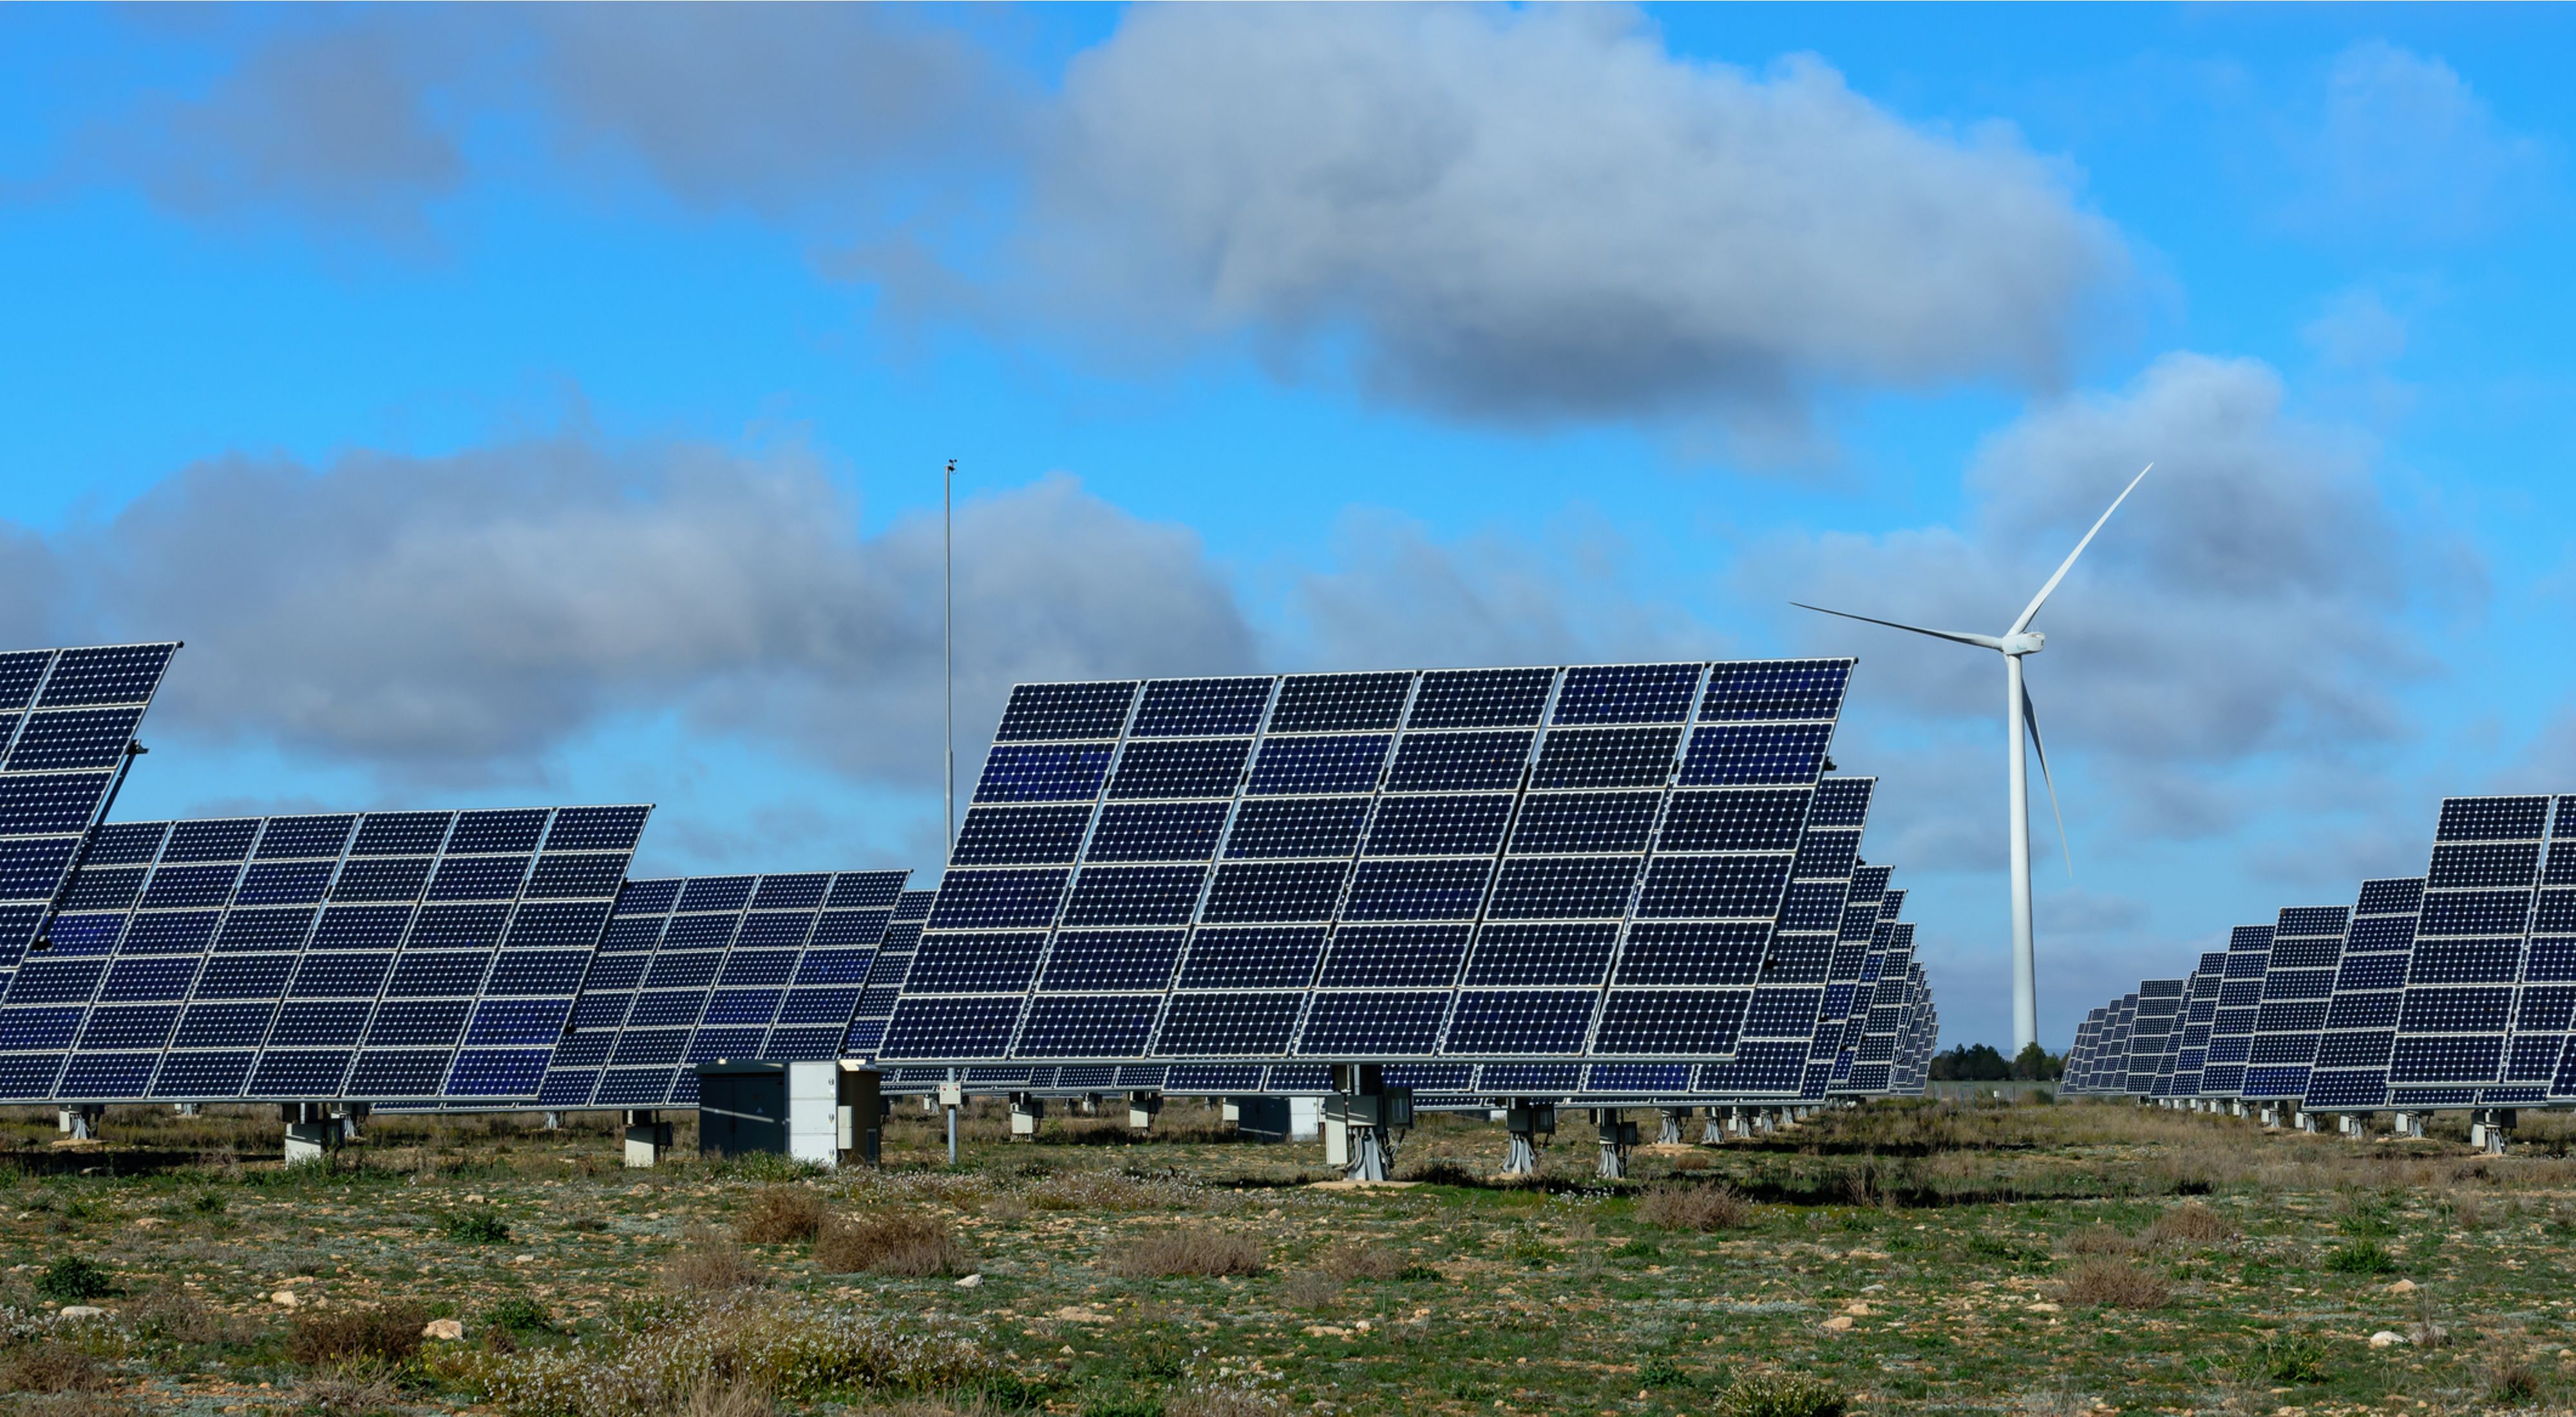 Photo of solar photovoltaic panels and one wind turbine in a field below a bright blue sky.